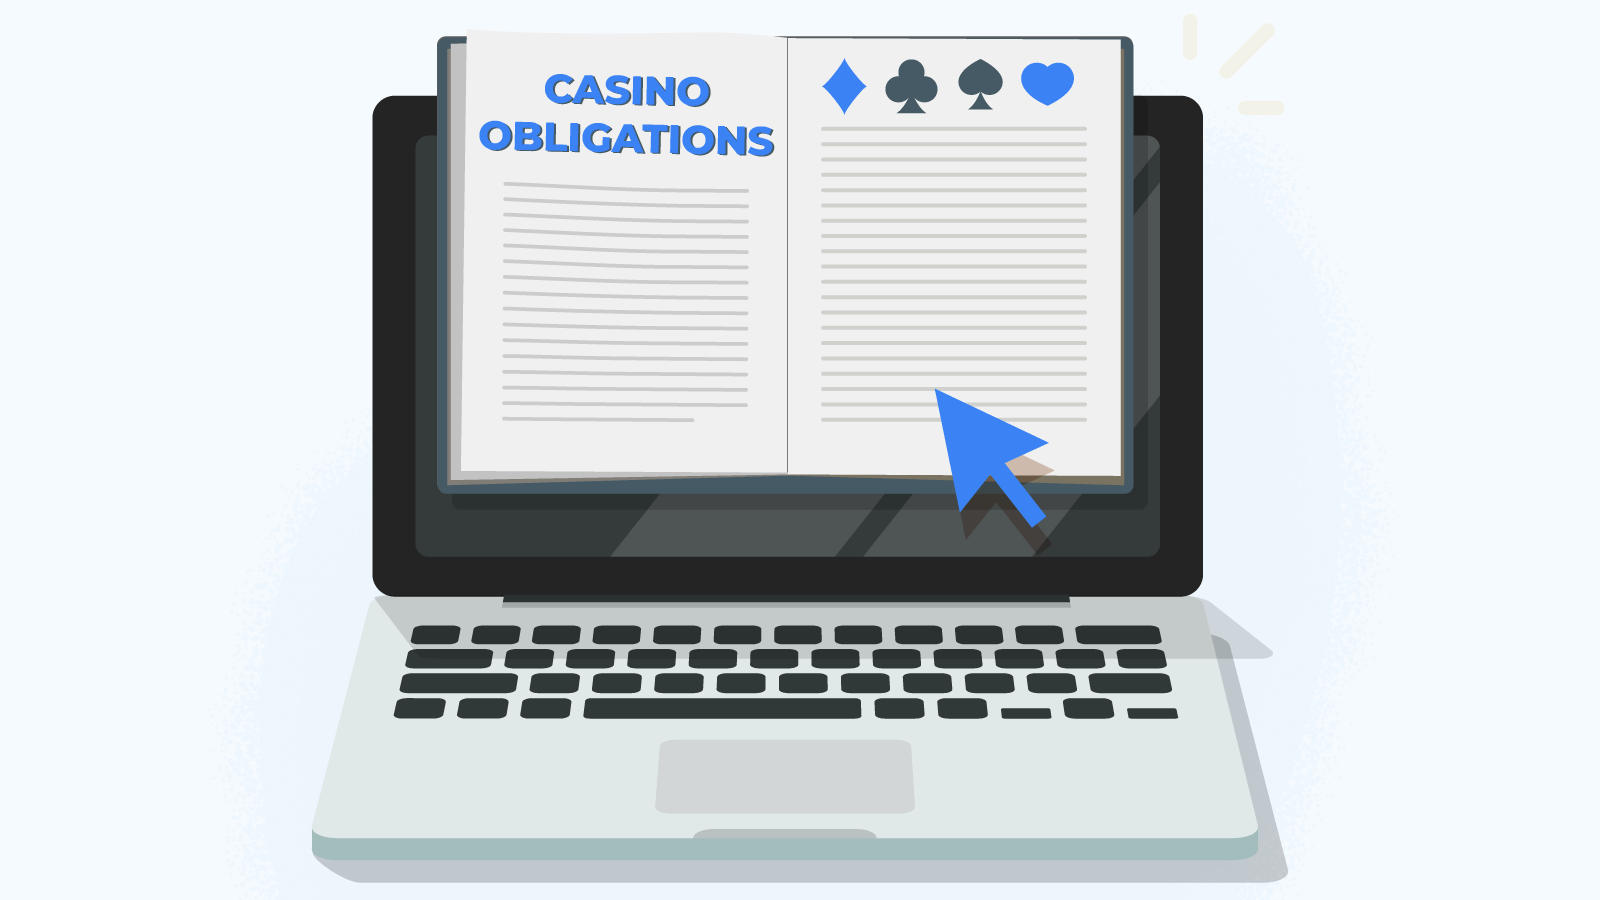 The obligations of the casino